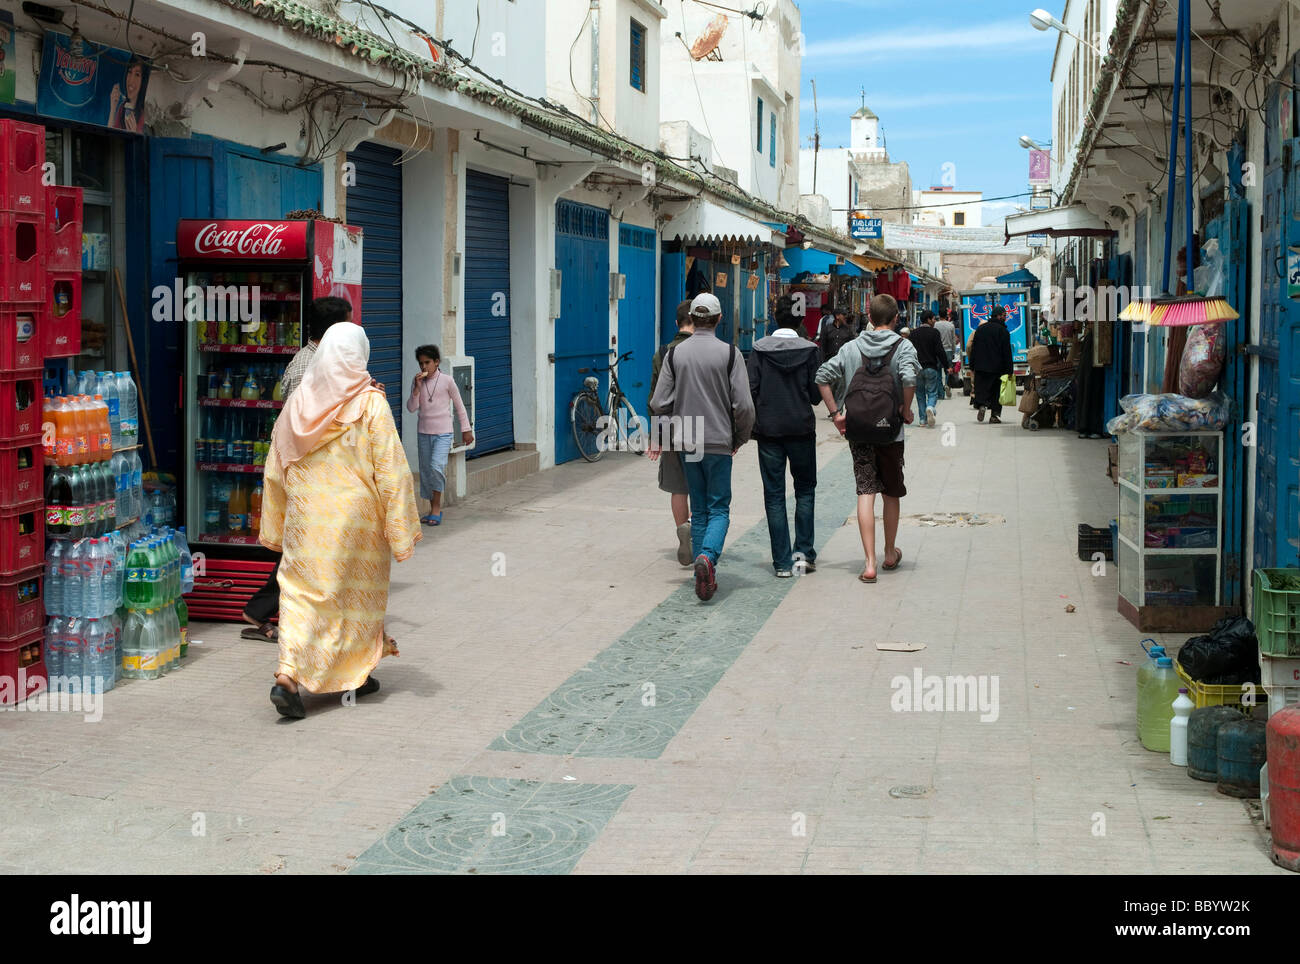 Traditionally dressed women and tourists in the city, Essaouira, Morocco, Africa Stock Photo